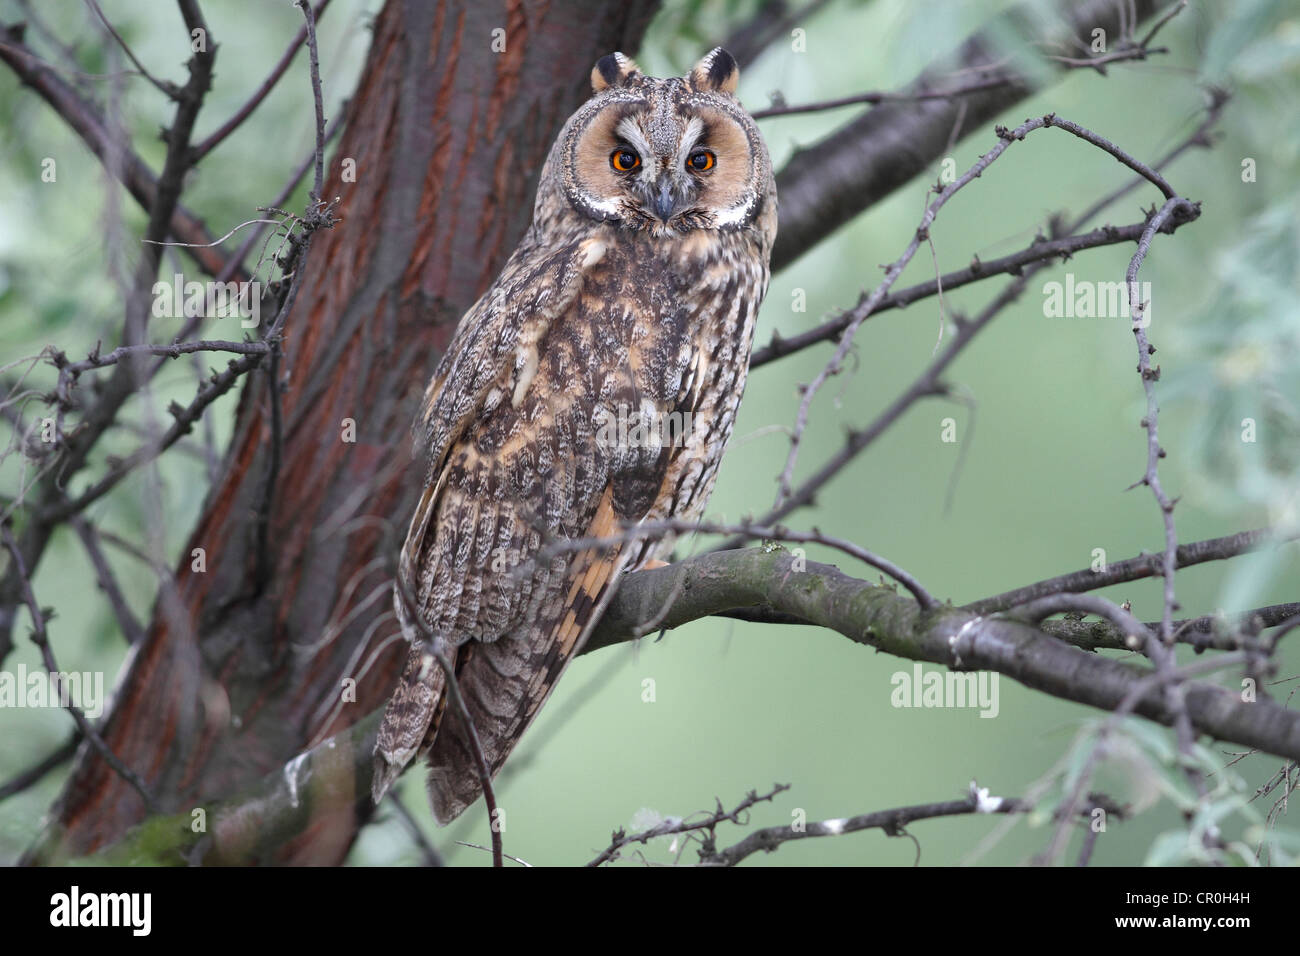 Long-eared Owl (Asio otus), perched on a branch with tree trunk at back, Apetlon, Lake Neusiedl, Burgenland, Austria, Europe Stock Photo